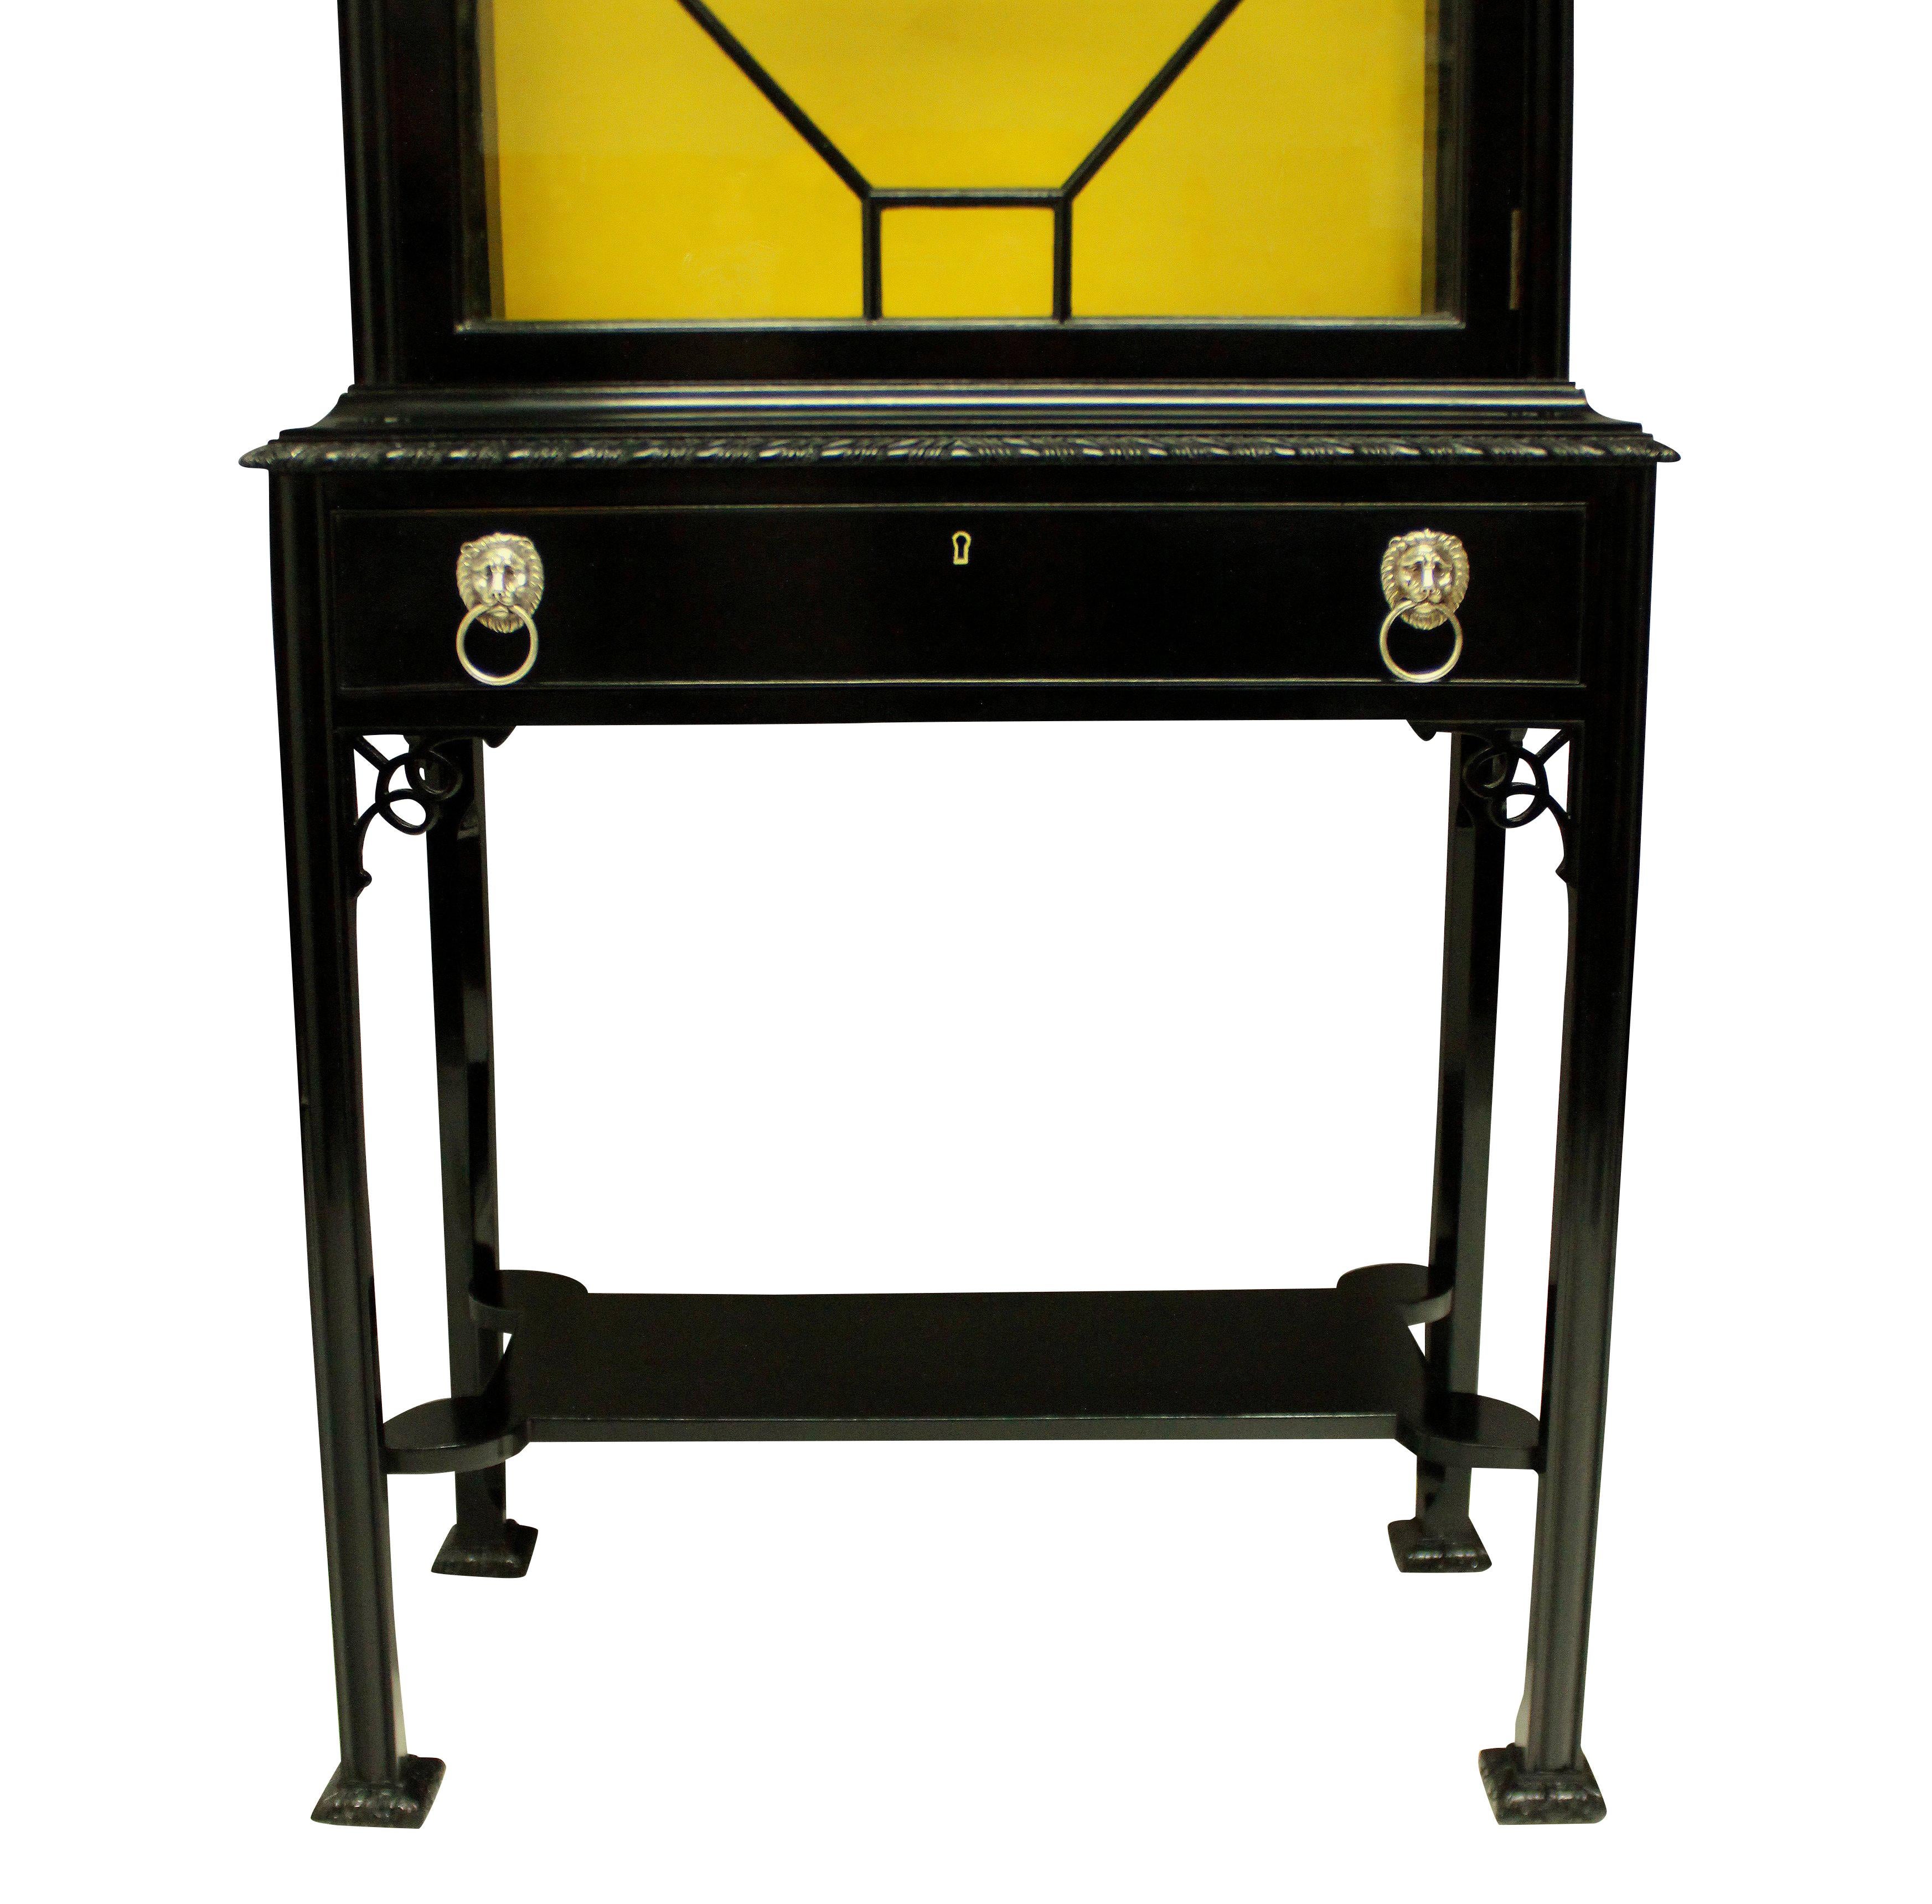 English Ebonized Chippendale Revival Display Cabinet